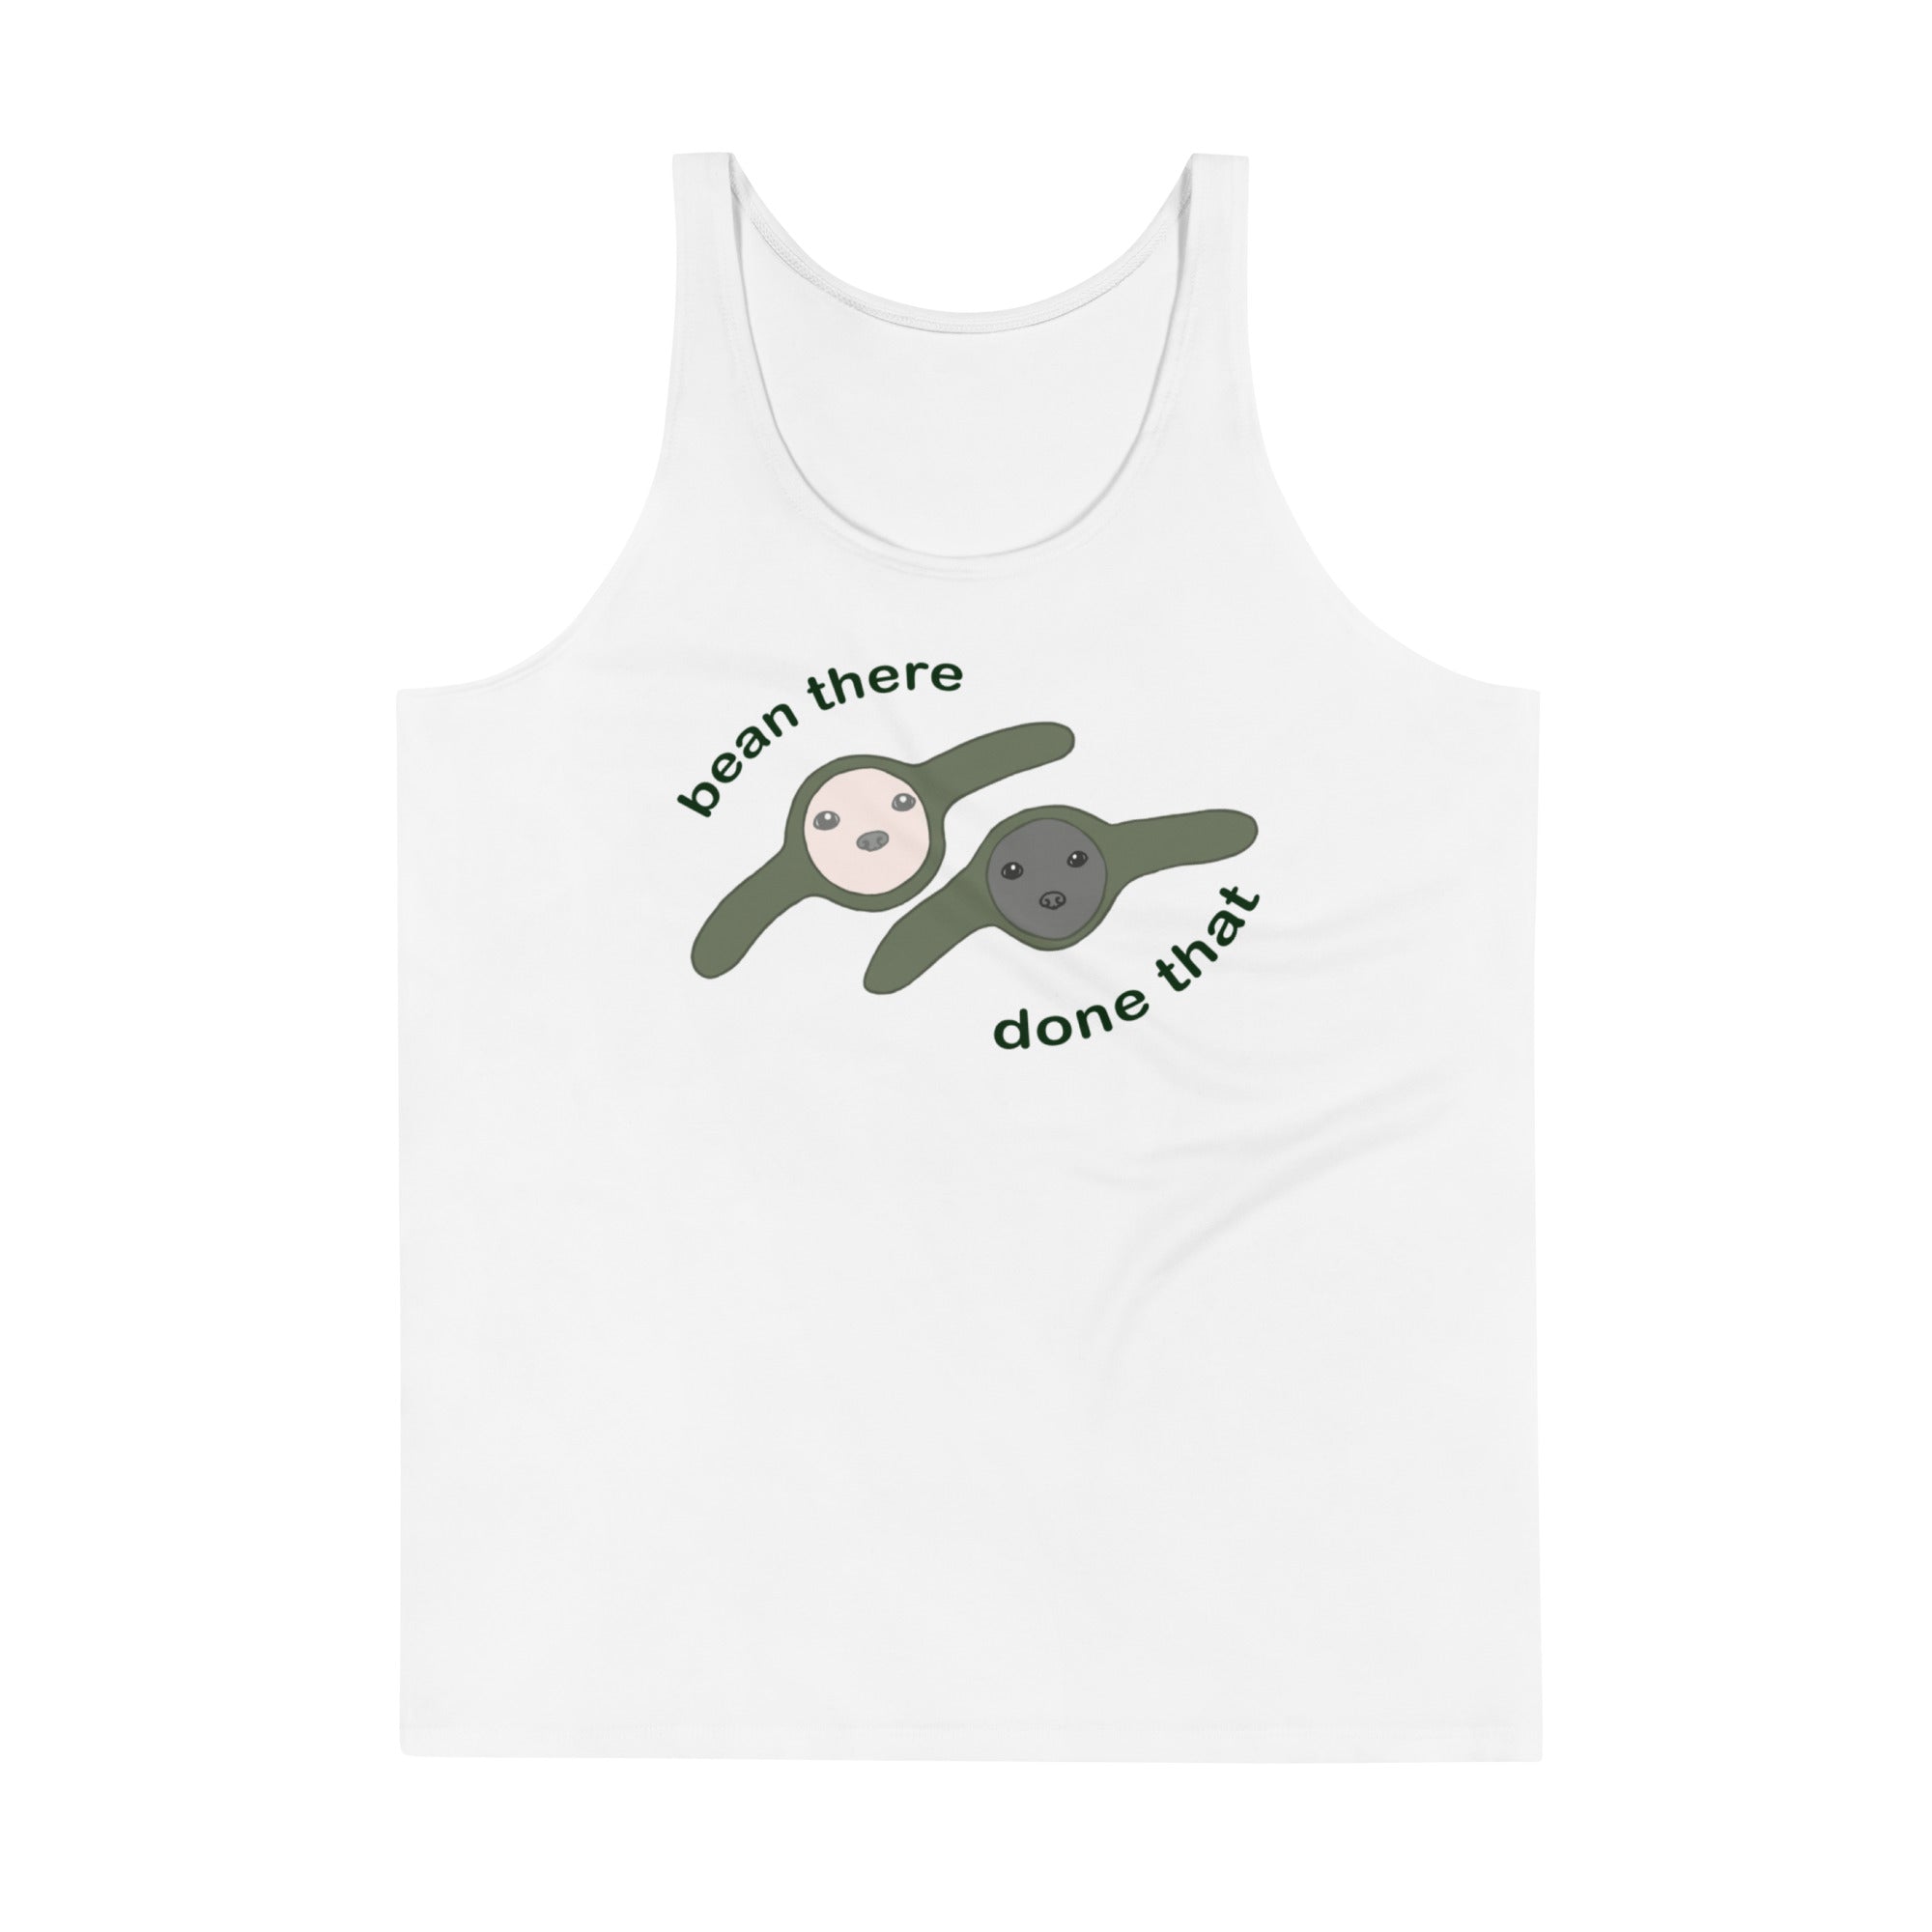 "Bean There, Done That" Adult Unisex Tank Top